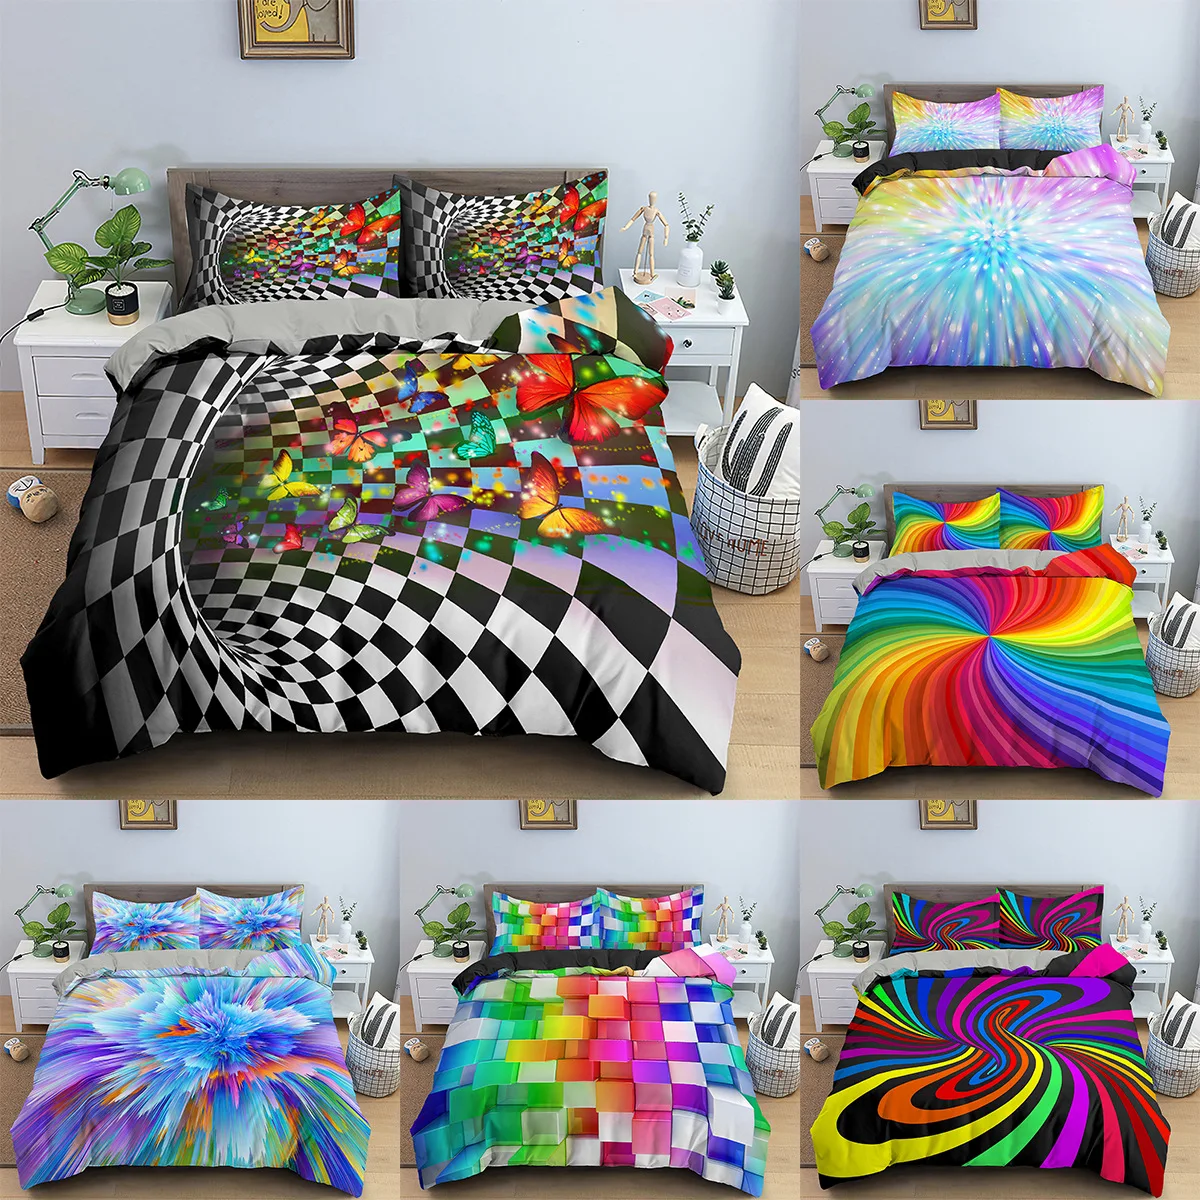 Psychedelic Bedding Set 3D Abstract Duvet Cover Quilt Cover With Zipper Queen Double Comforter Sets Kids Gifts No Bed Sheet